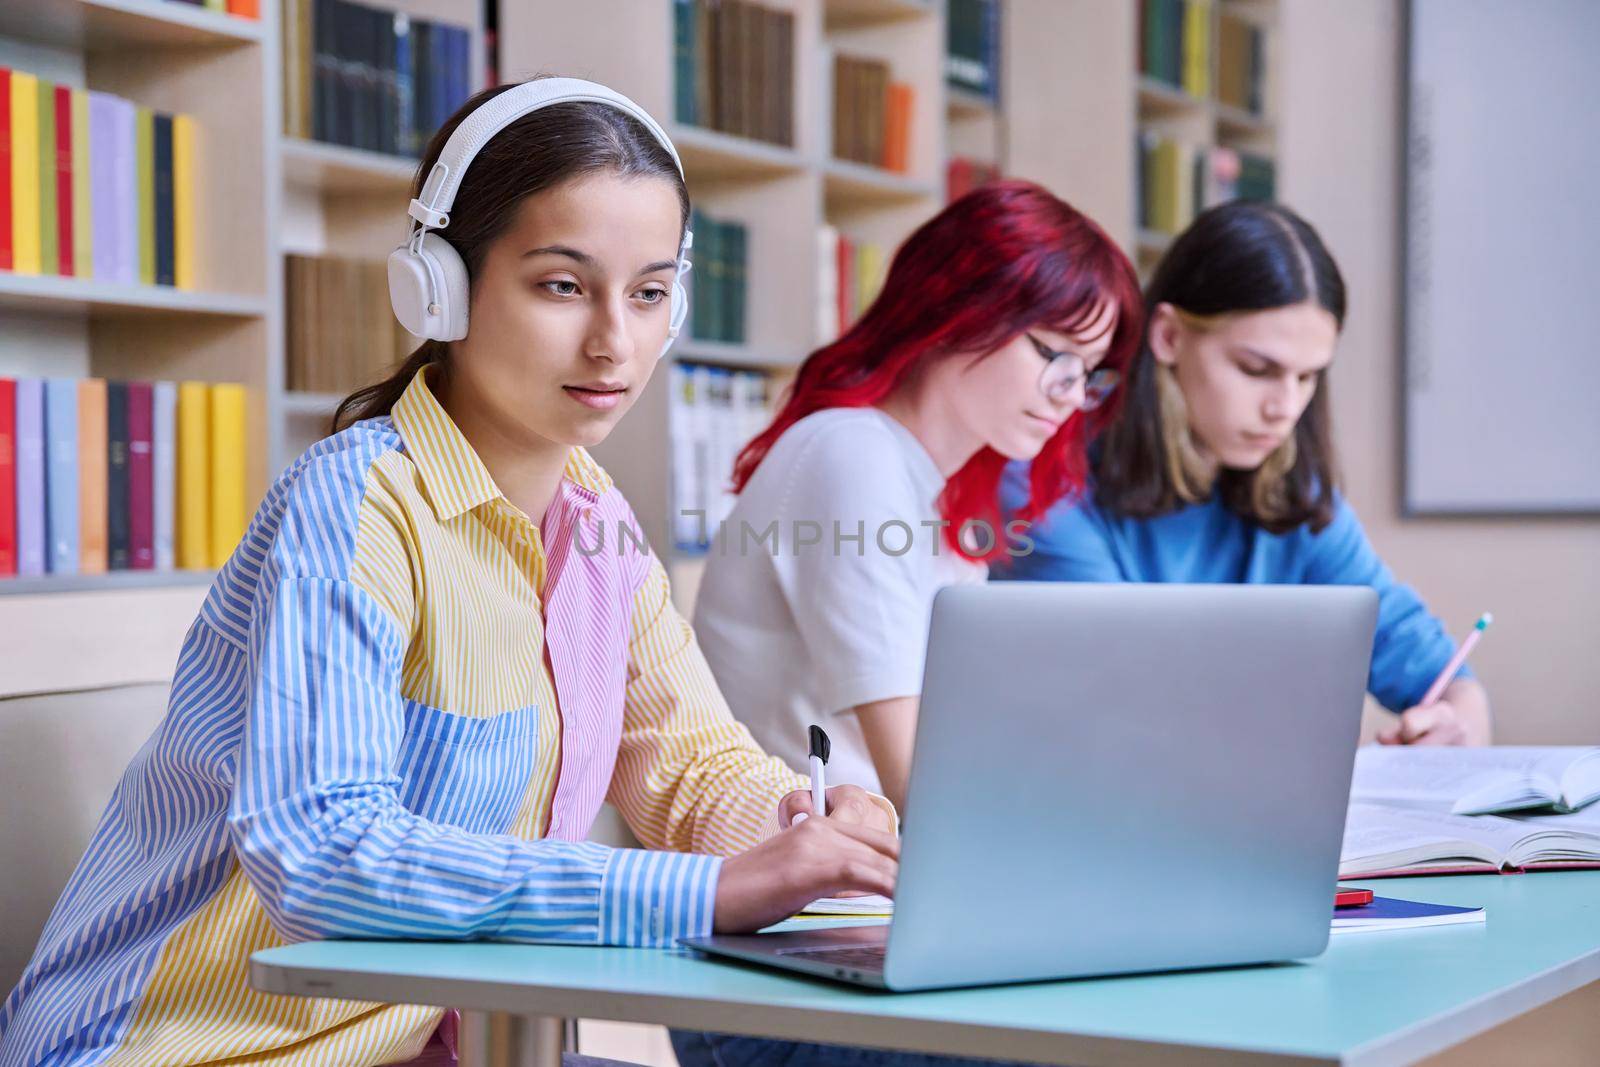 Group of teenage students study in school library classroom. In focus is teenager girl in headphones using laptop. High school, learning, education, knowledge, adolescence, people concept